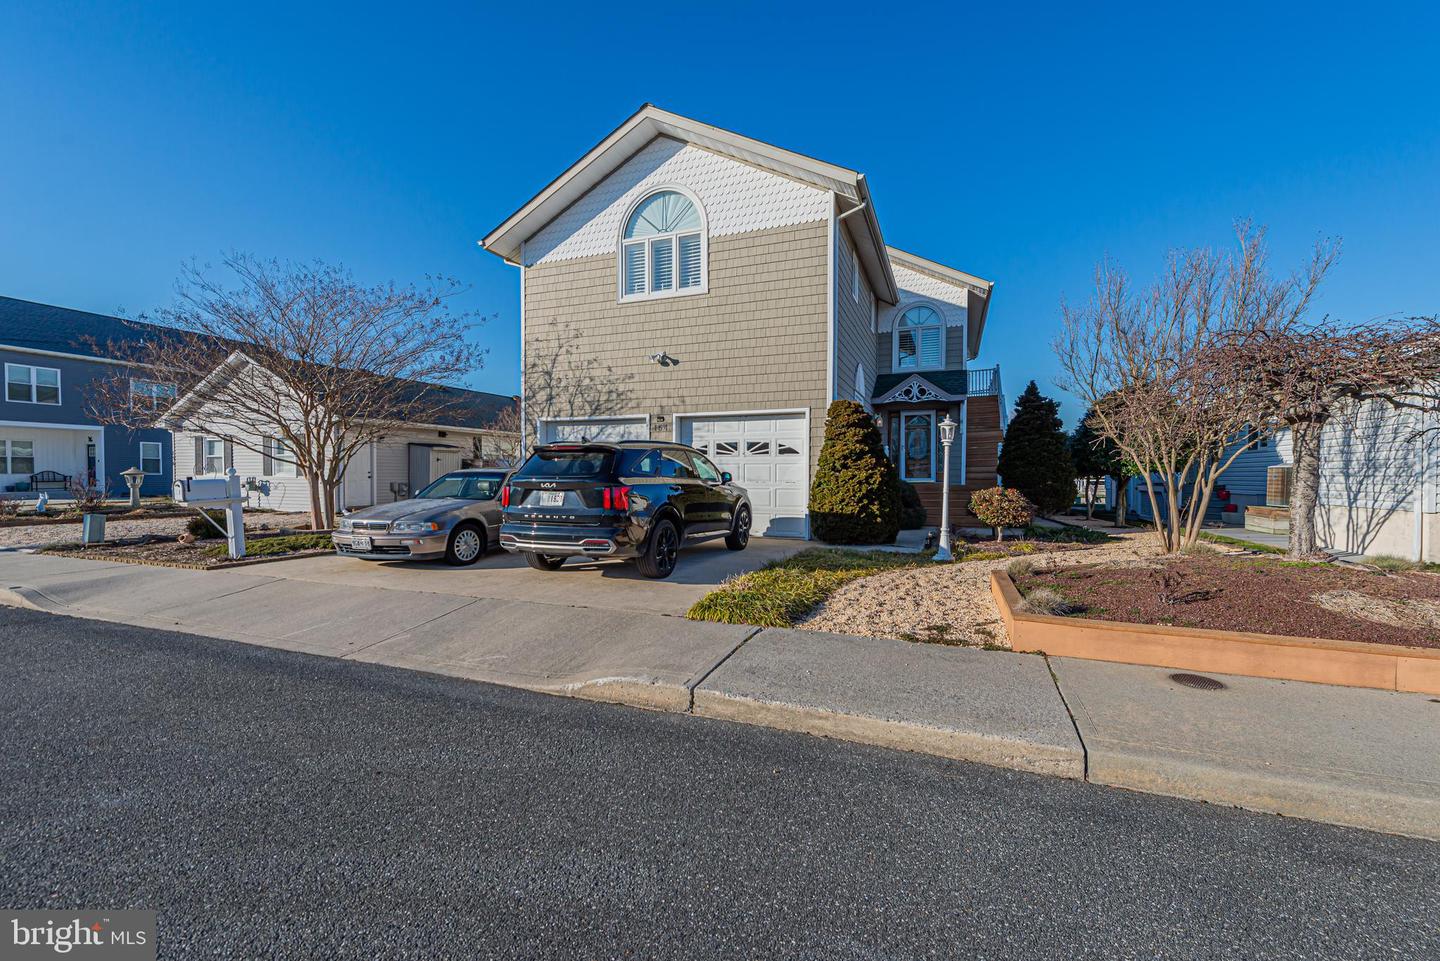 MDWO2019074-802877621522-2024-02-25-13-51-28 154 Old Wharf Rd | Ocean City, MD Real Estate For Sale | MLS# Mdwo2019074  - 1st Choice Properties